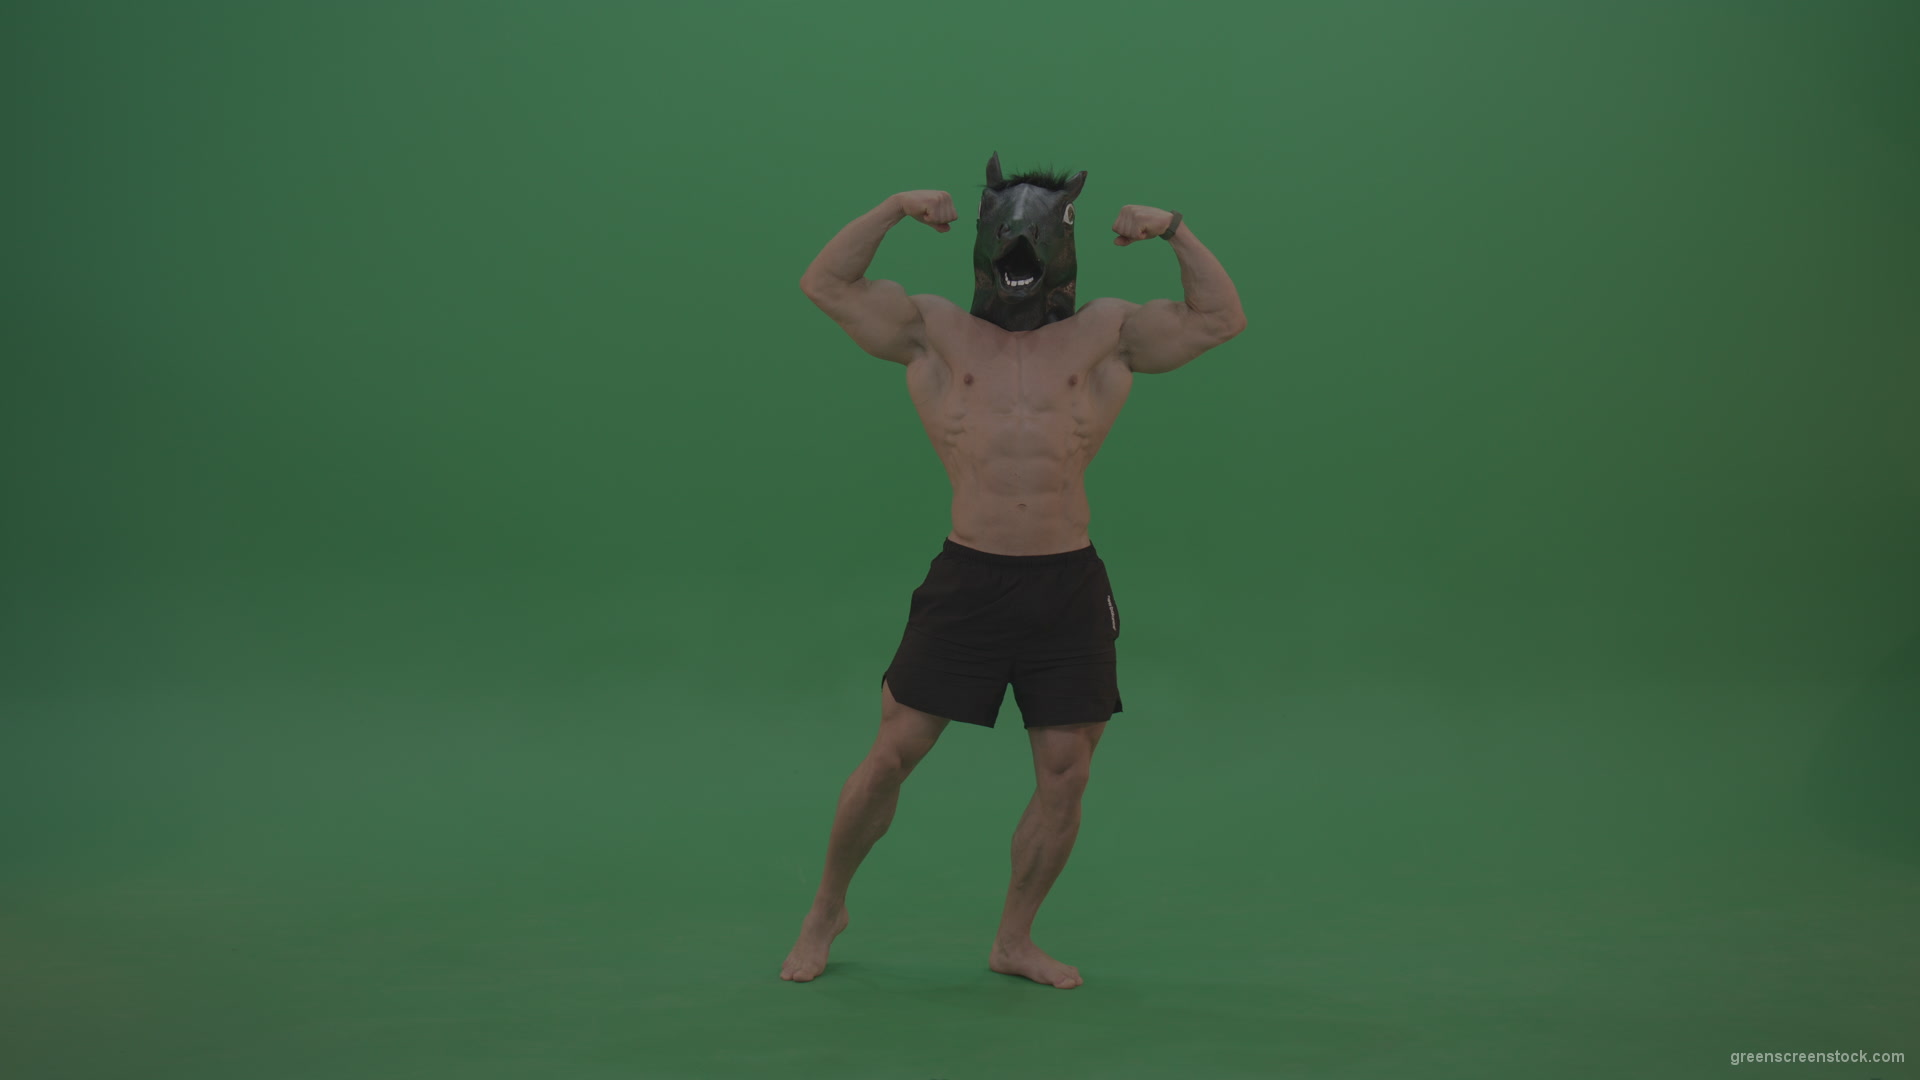 Ripped-man-with-horse-head-displays-body-over-chromakey-background_007 Green Screen Stock